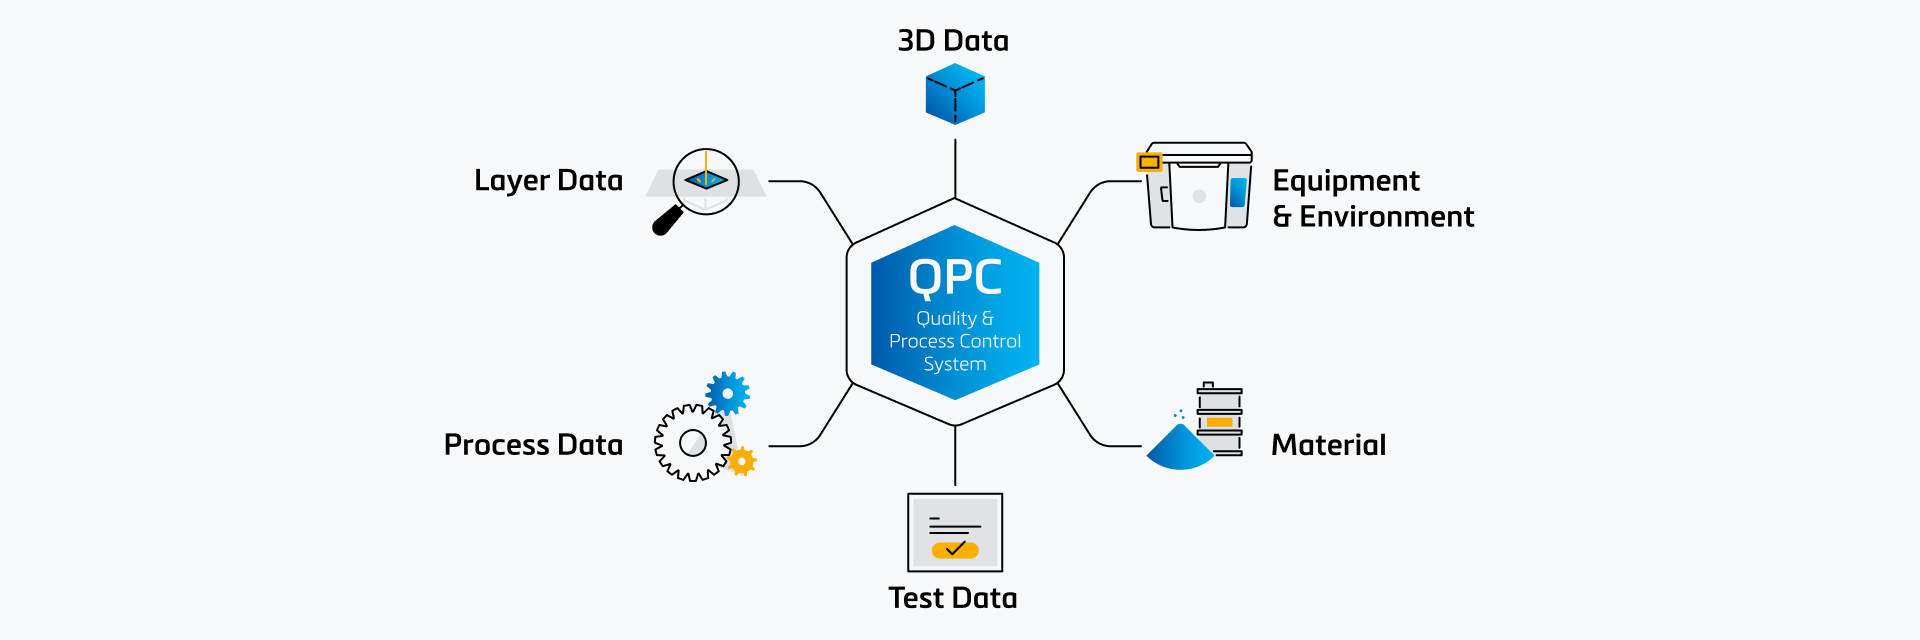 An image showing the QPC system connecting to different data sources, such as layer, 3D, process, and test data, along with material and equipment & environment information